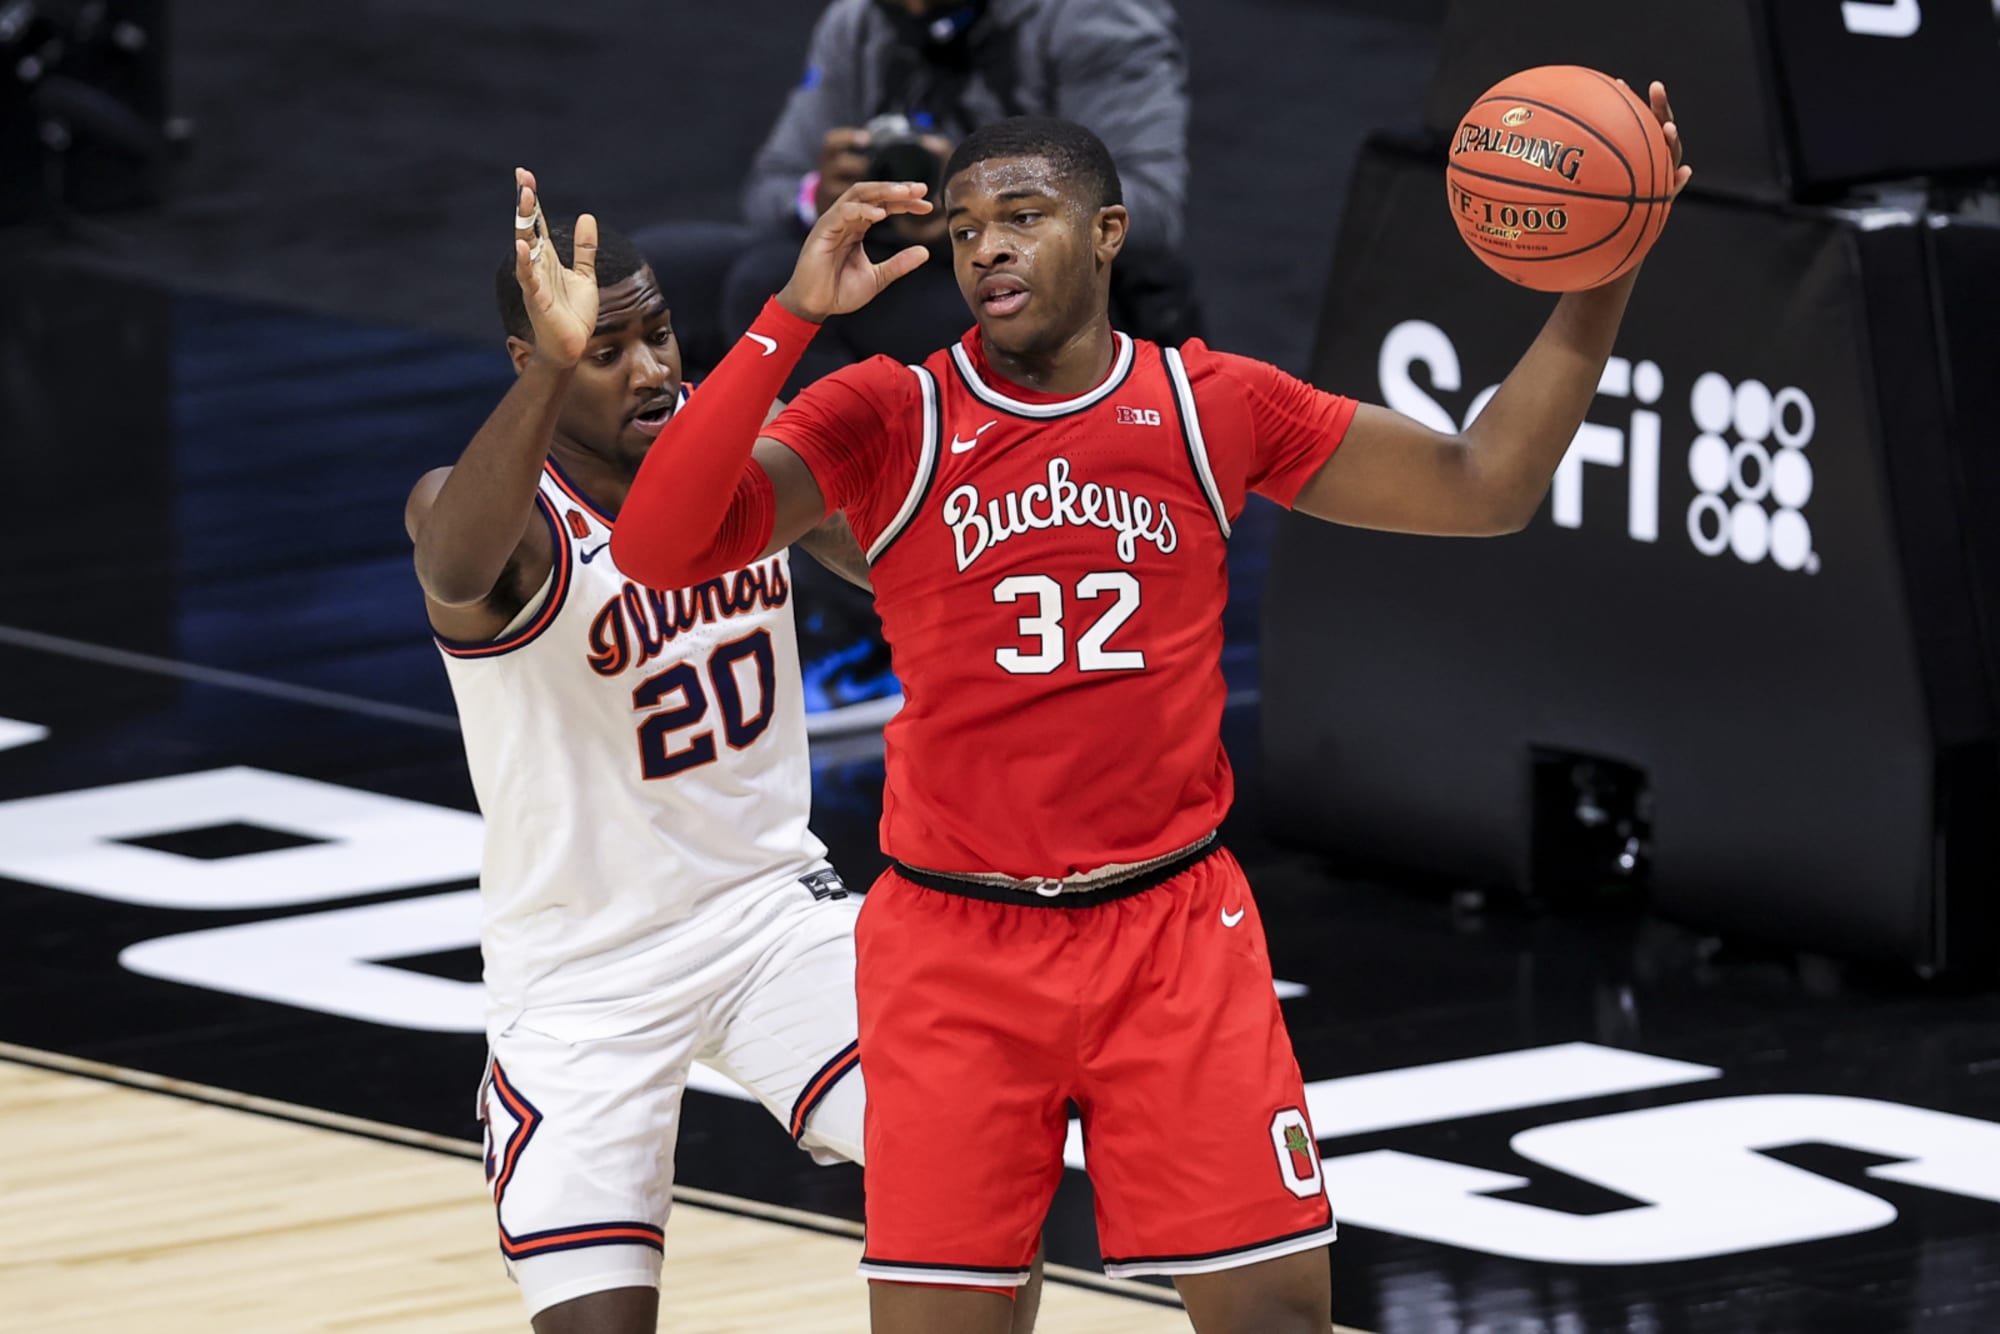 This one stat proves Ohio State basketball is a March Madness contender